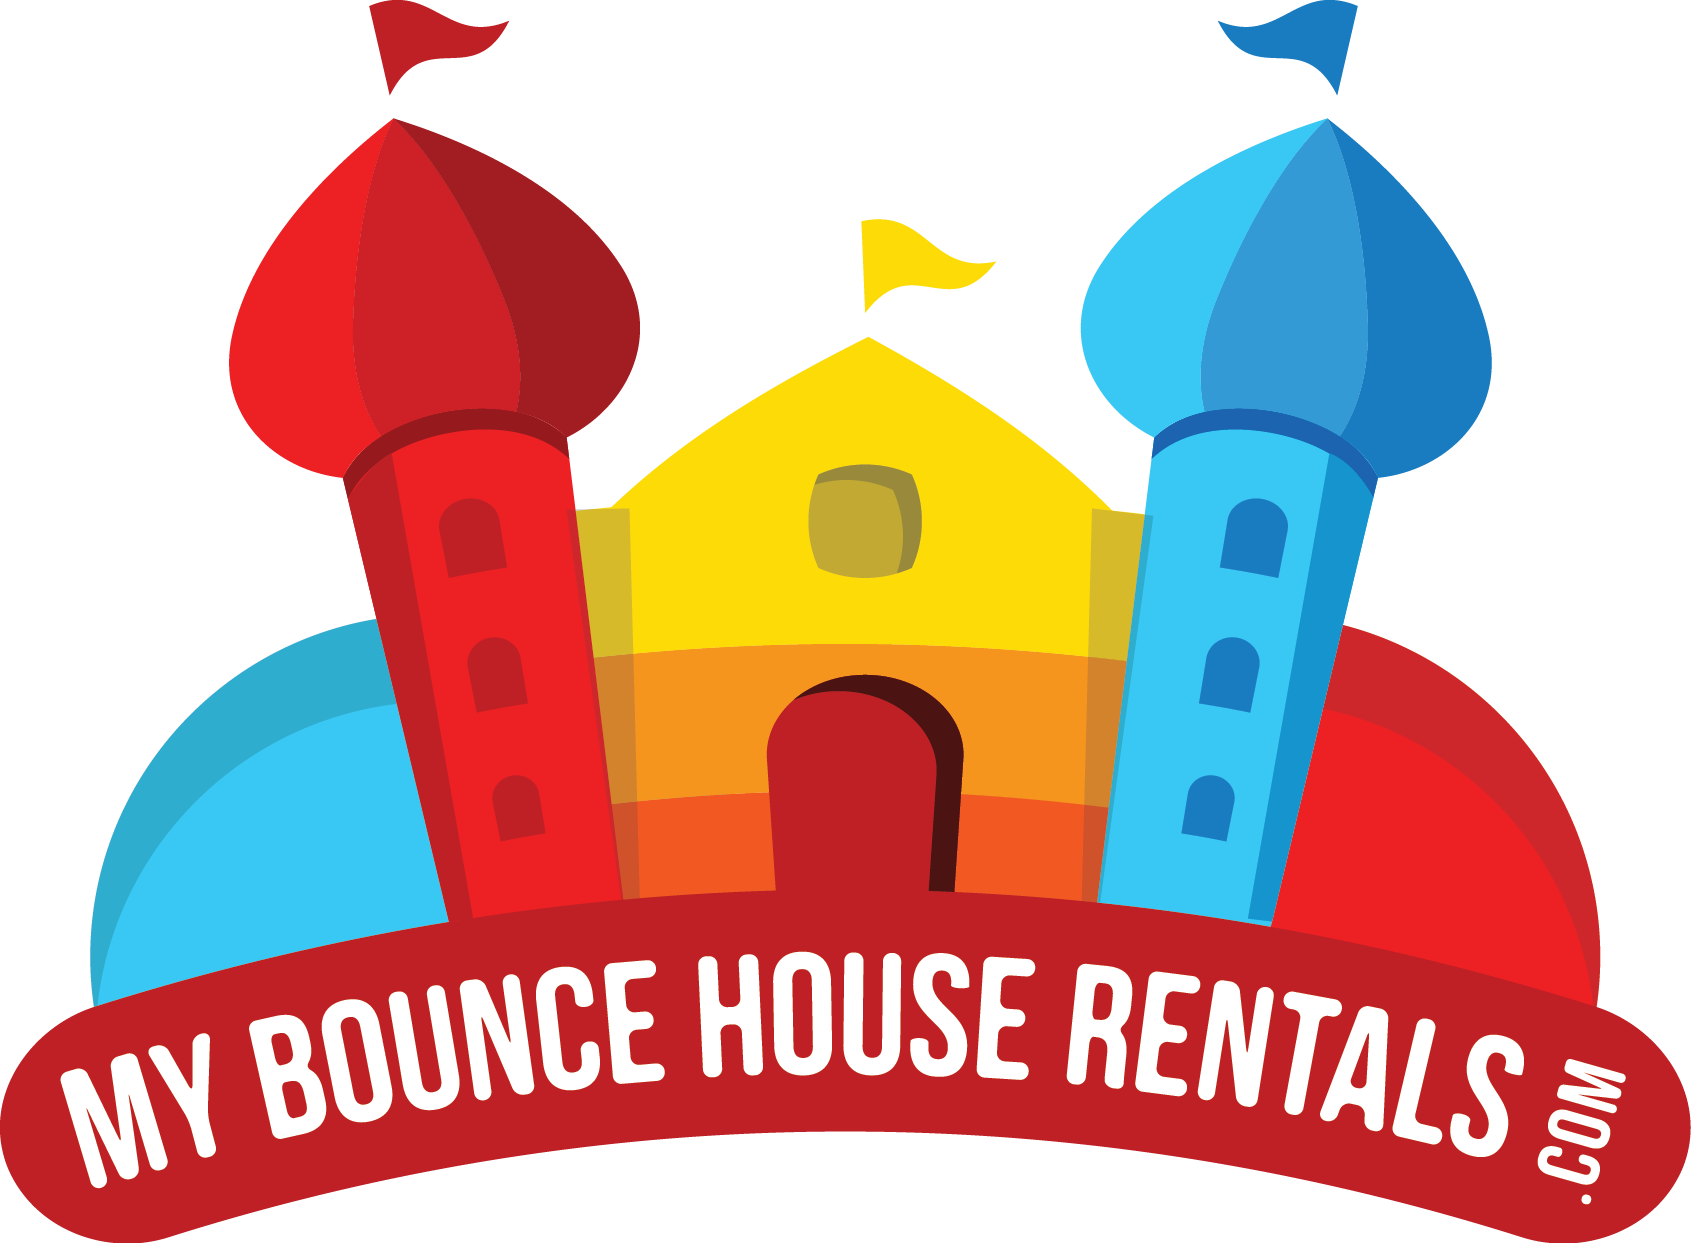 My bounce house rentals of Durham's Logo